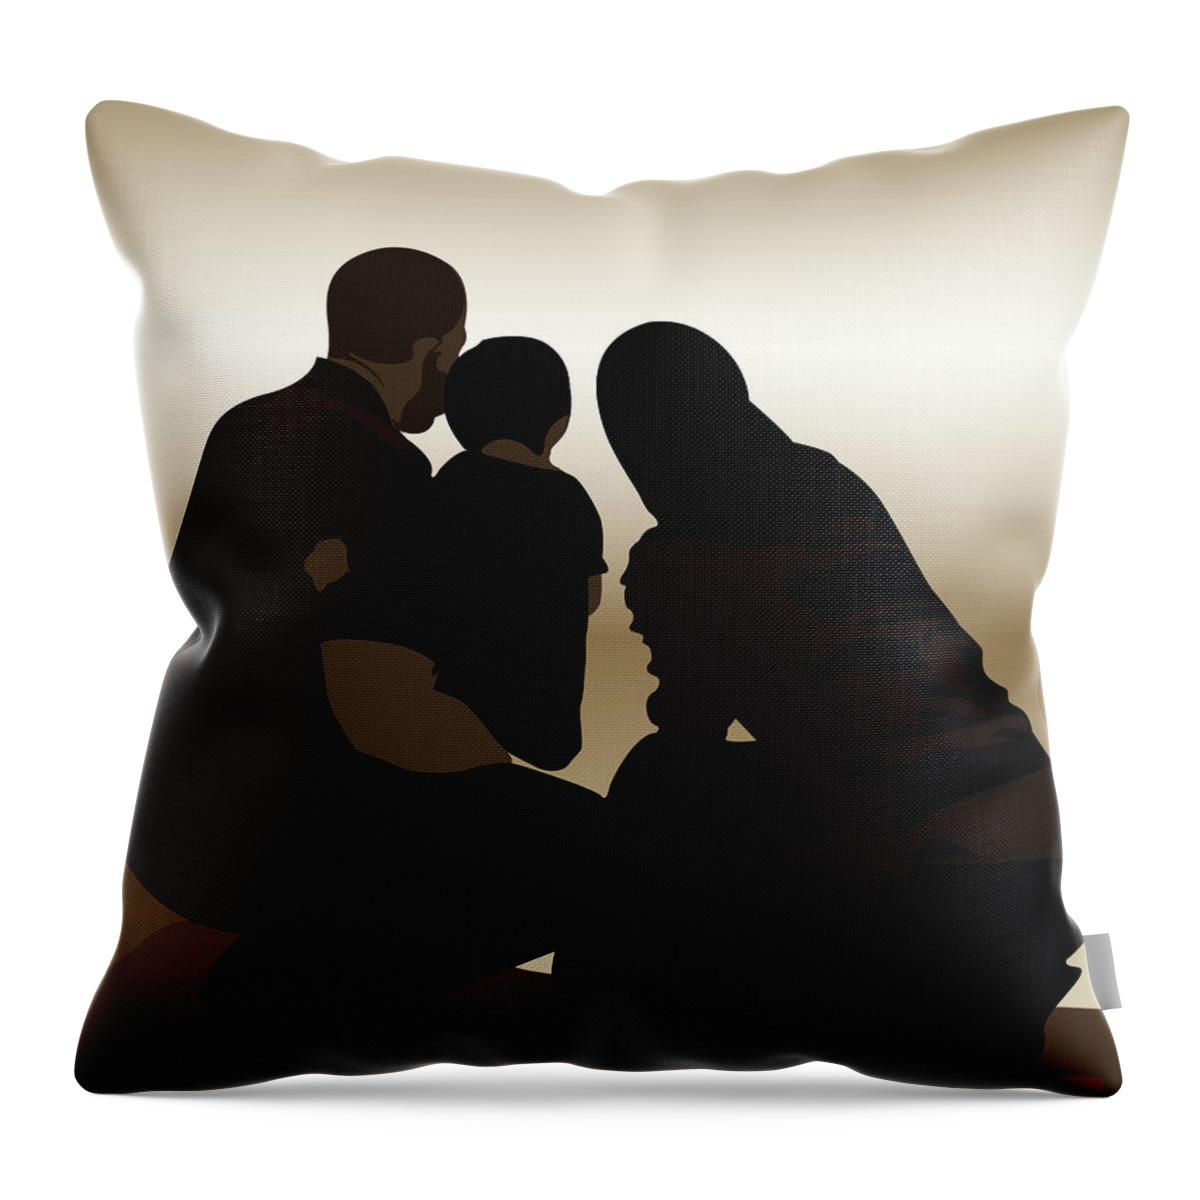 Family Throw Pillow featuring the digital art Print #2 by Scheme Of Things Graphics